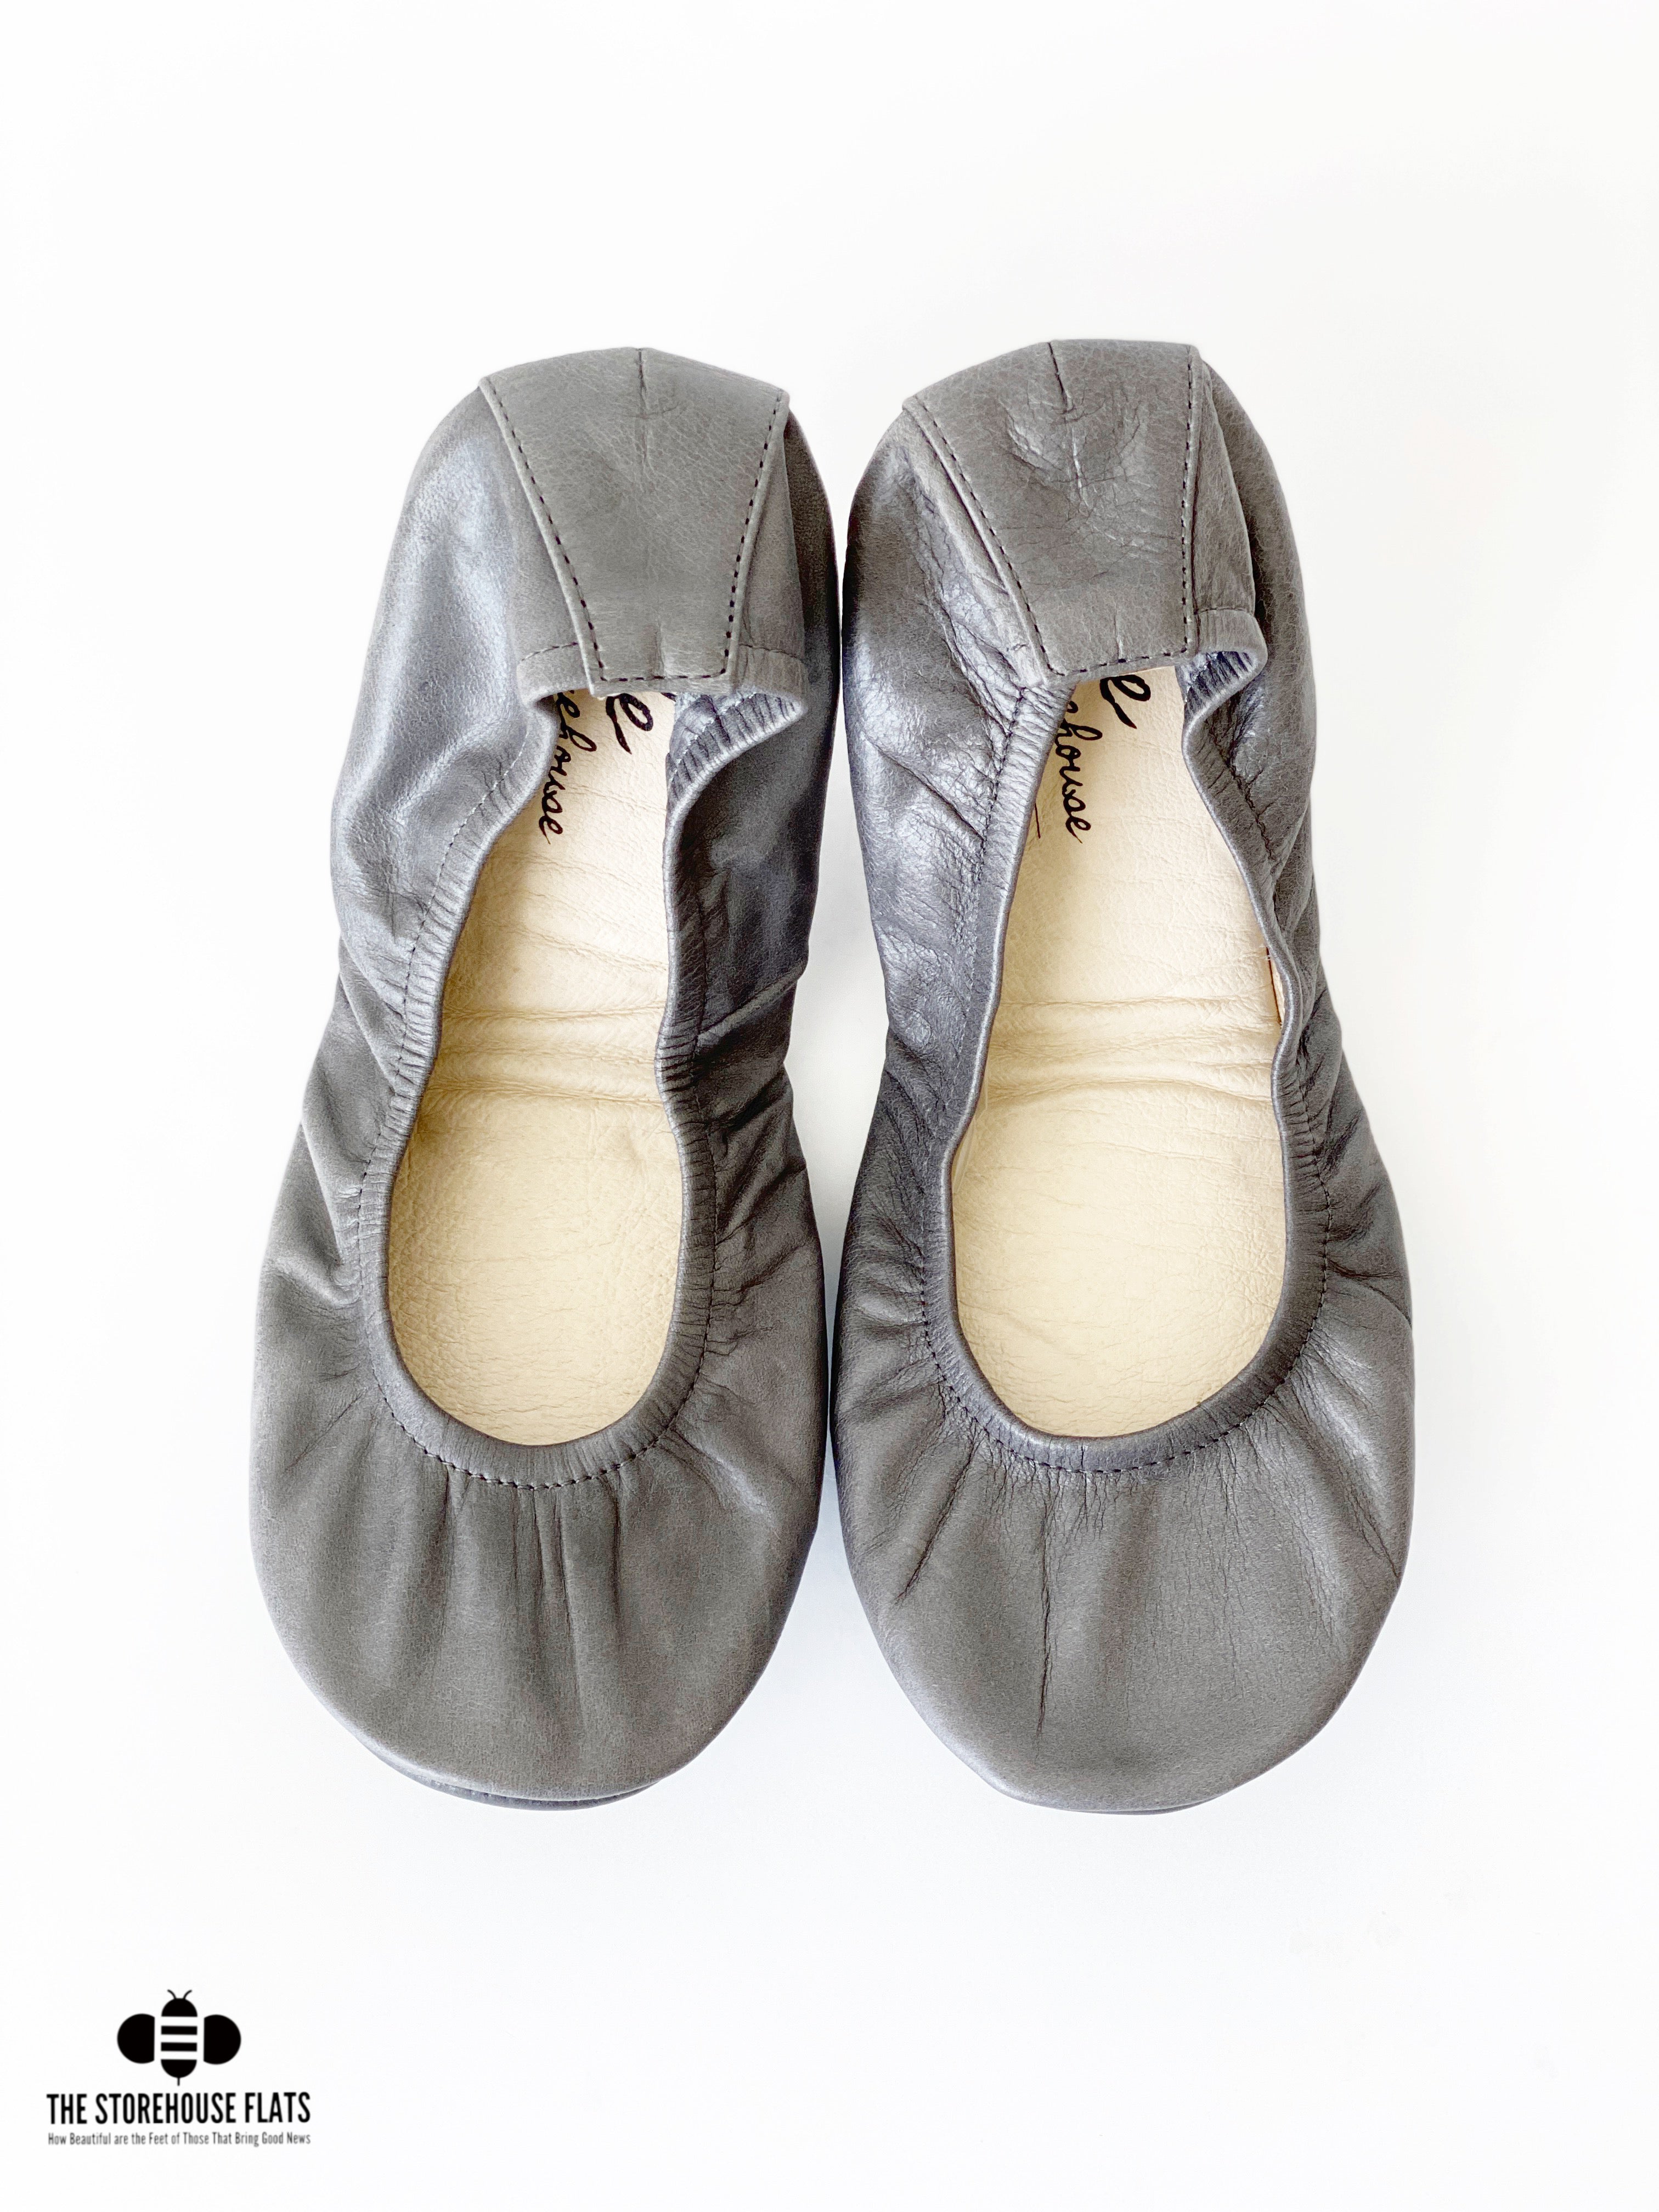 SLATE GRAY OIL TANNED | IN STOCK - The Storehouse Flats